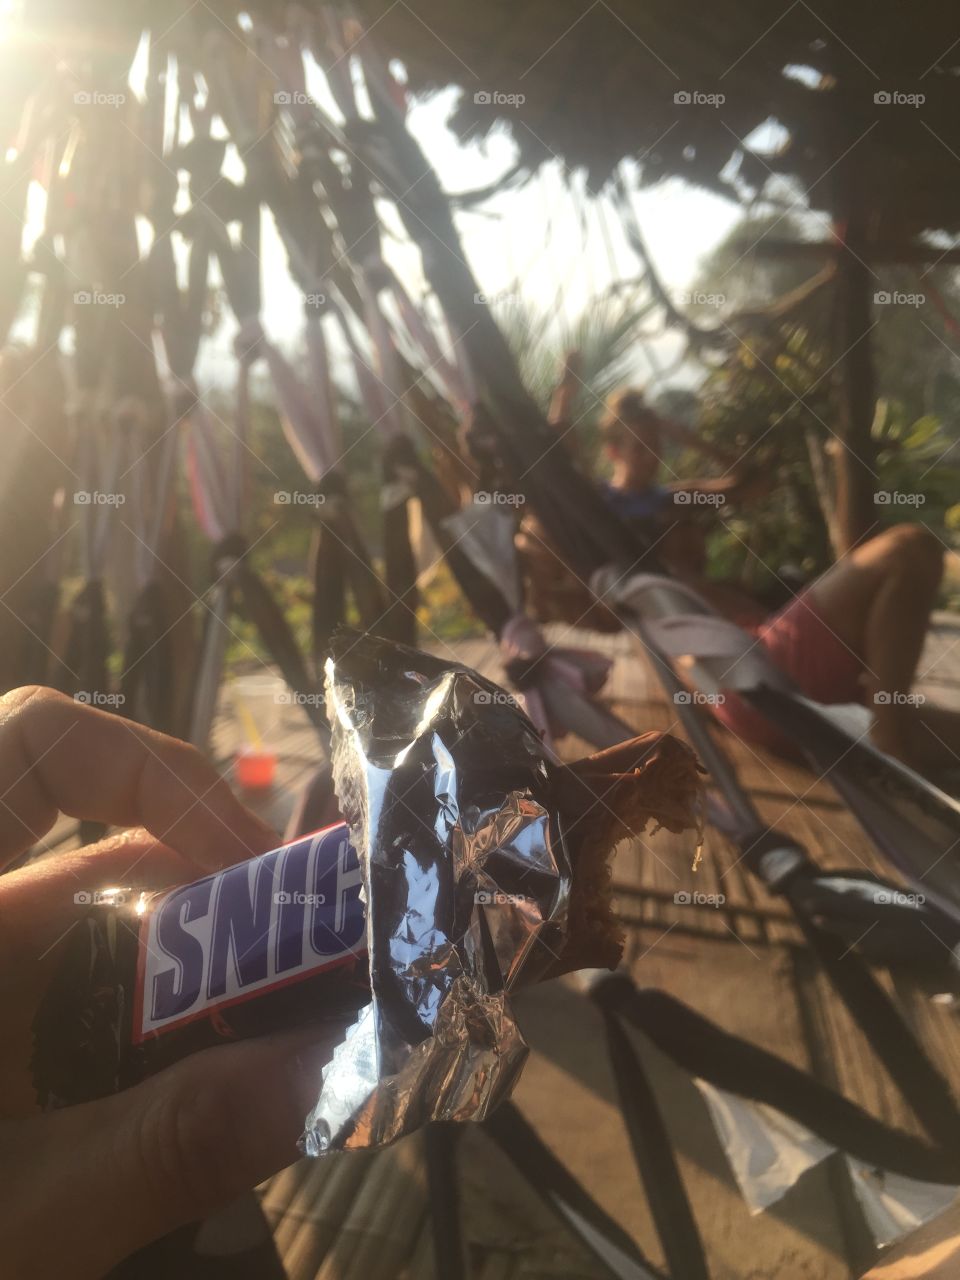 One thing I love about Snickers bars is that they taste virtually the same all over the world. I've had them in USA ,South America and this one was in Thailand while relaxing in the hammock  in the mountain town of pai